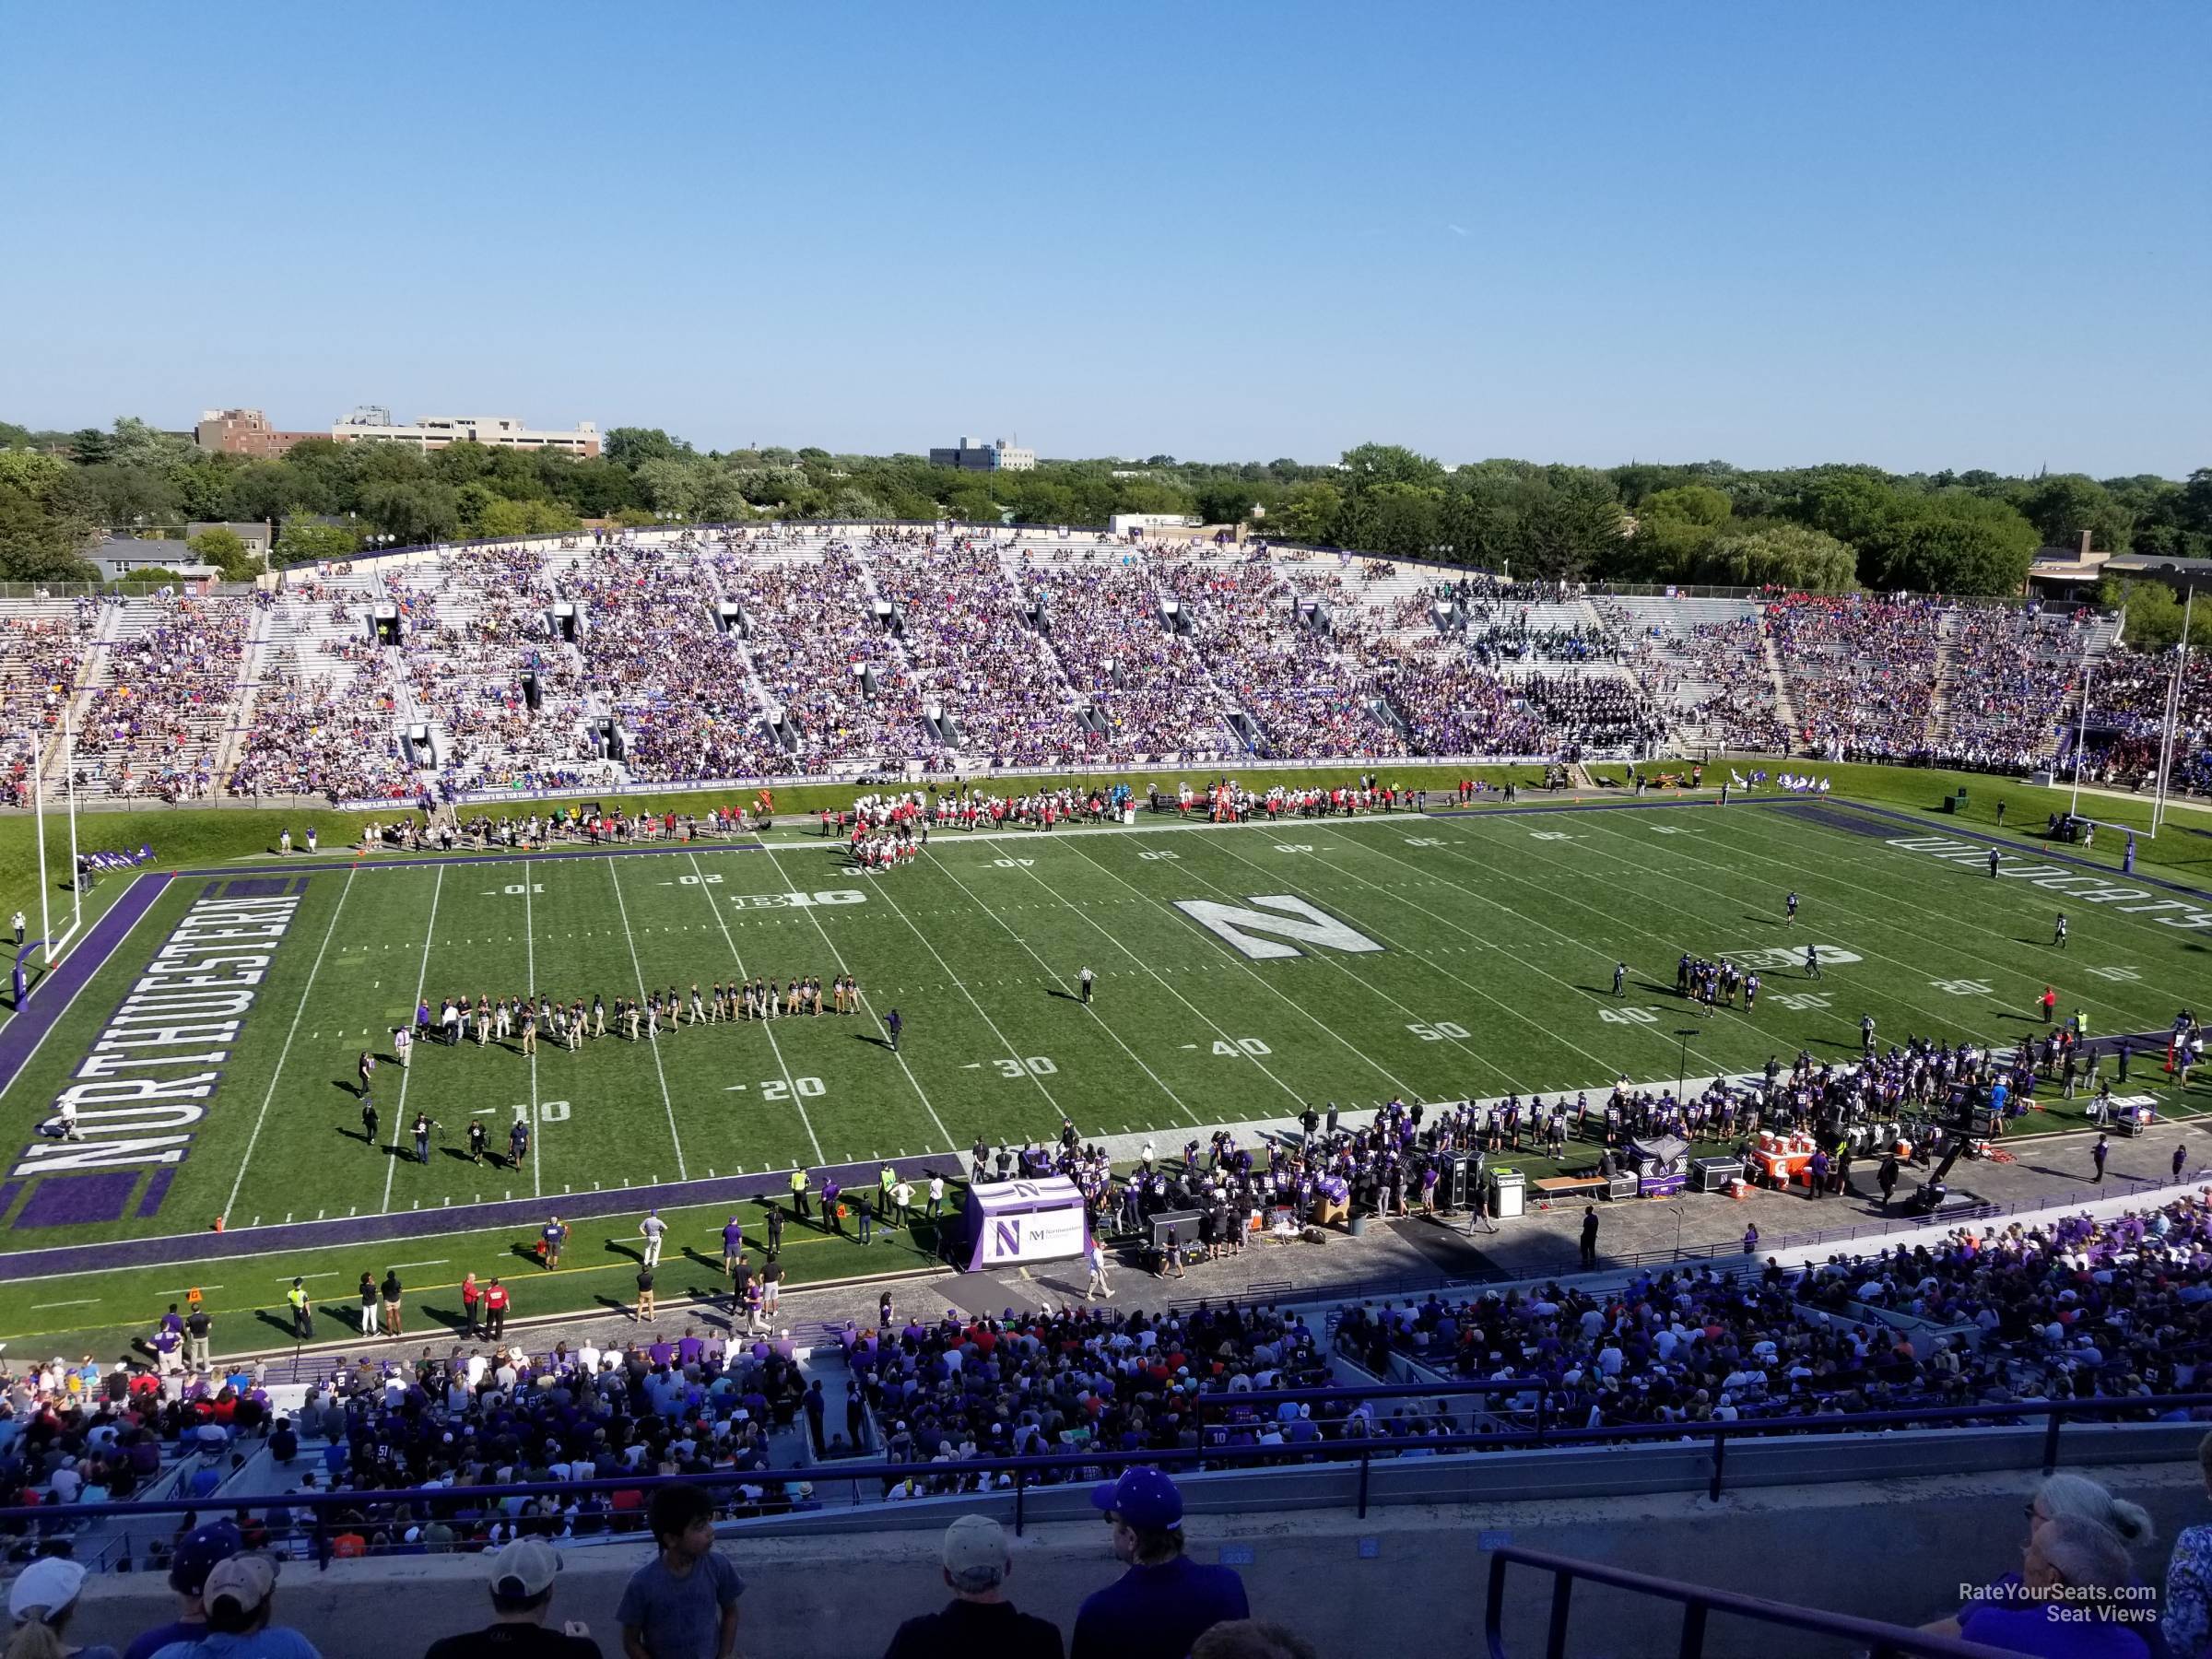 section 232, row 23 seat view  - ryan field